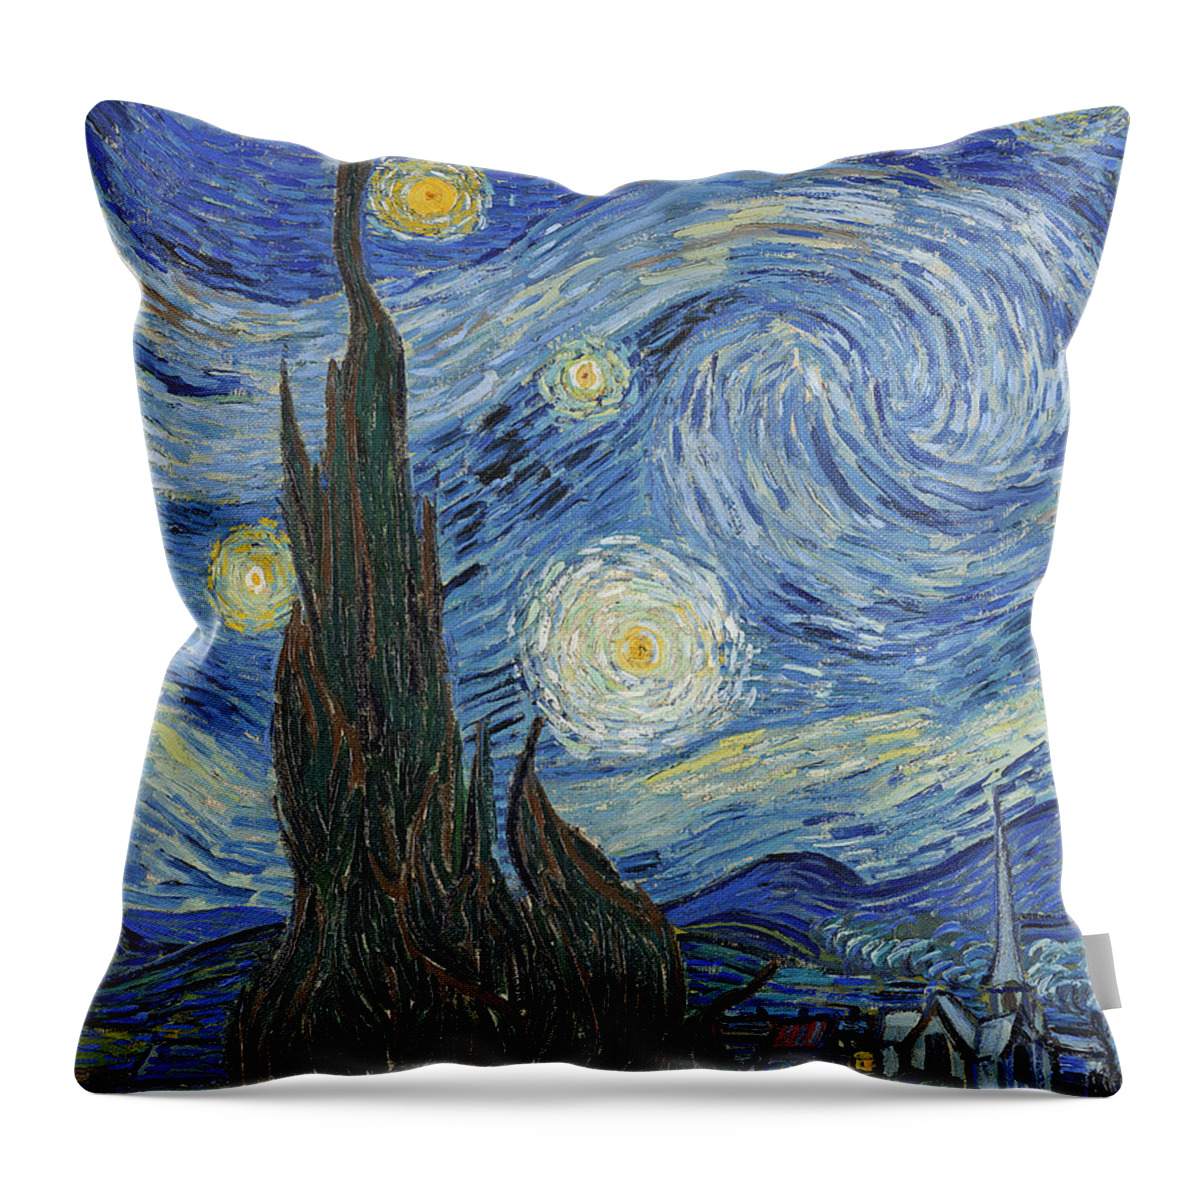 Starry Night Throw Pillow featuring the painting The Starry Night by Vincent Van Gogh